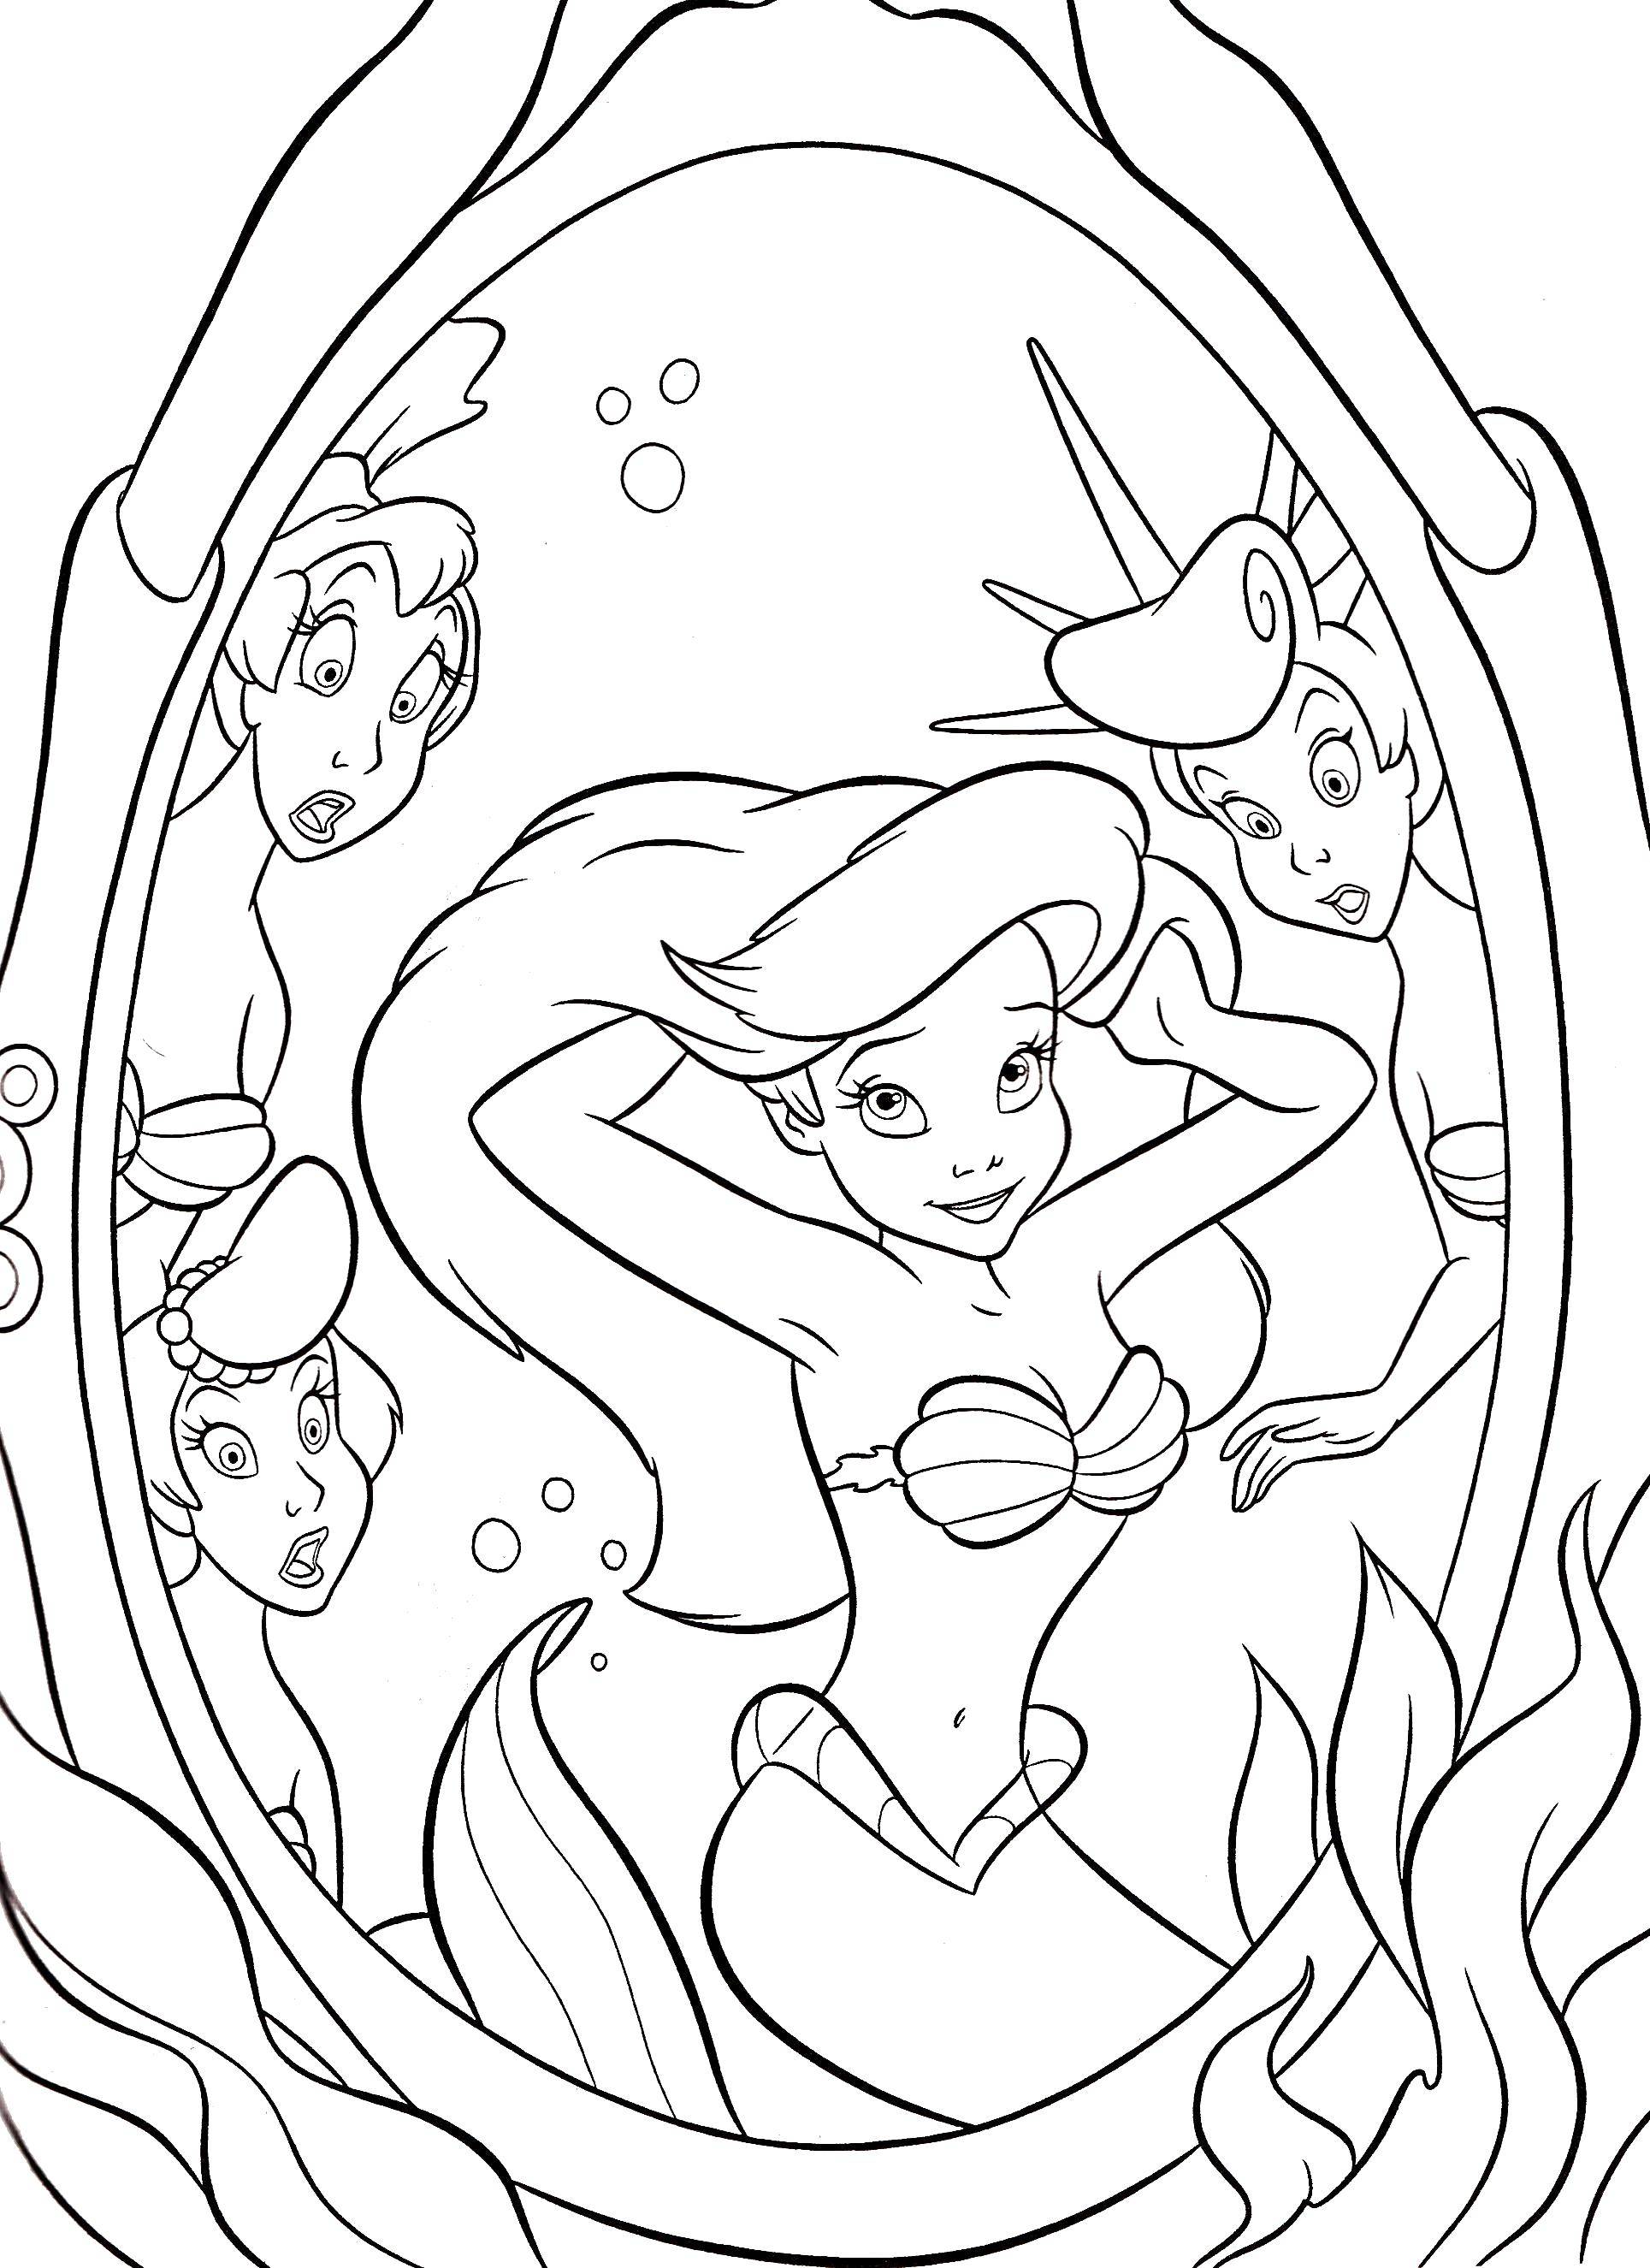 Coloring Ariel is the most beautiful. Category Disney coloring pages. Tags:  Disney, the little mermaid, Ariel.